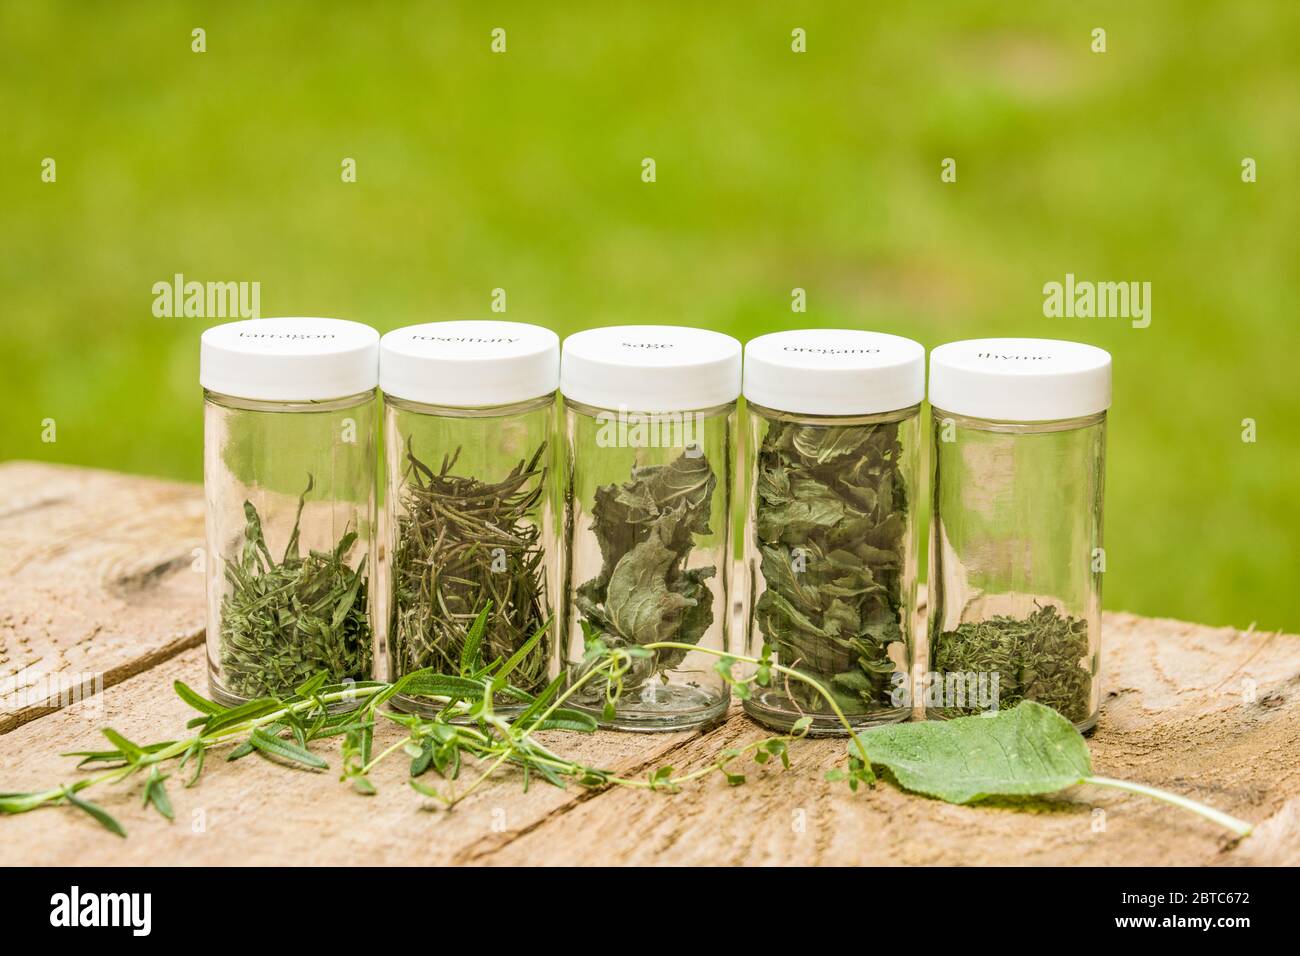 Jars of freshly dried herbs (french thyme, rosemary, sage, oregano, french tarragon), along with fresh Tuscan Blue rosemary, French Thyme and sage) on Stock Photo